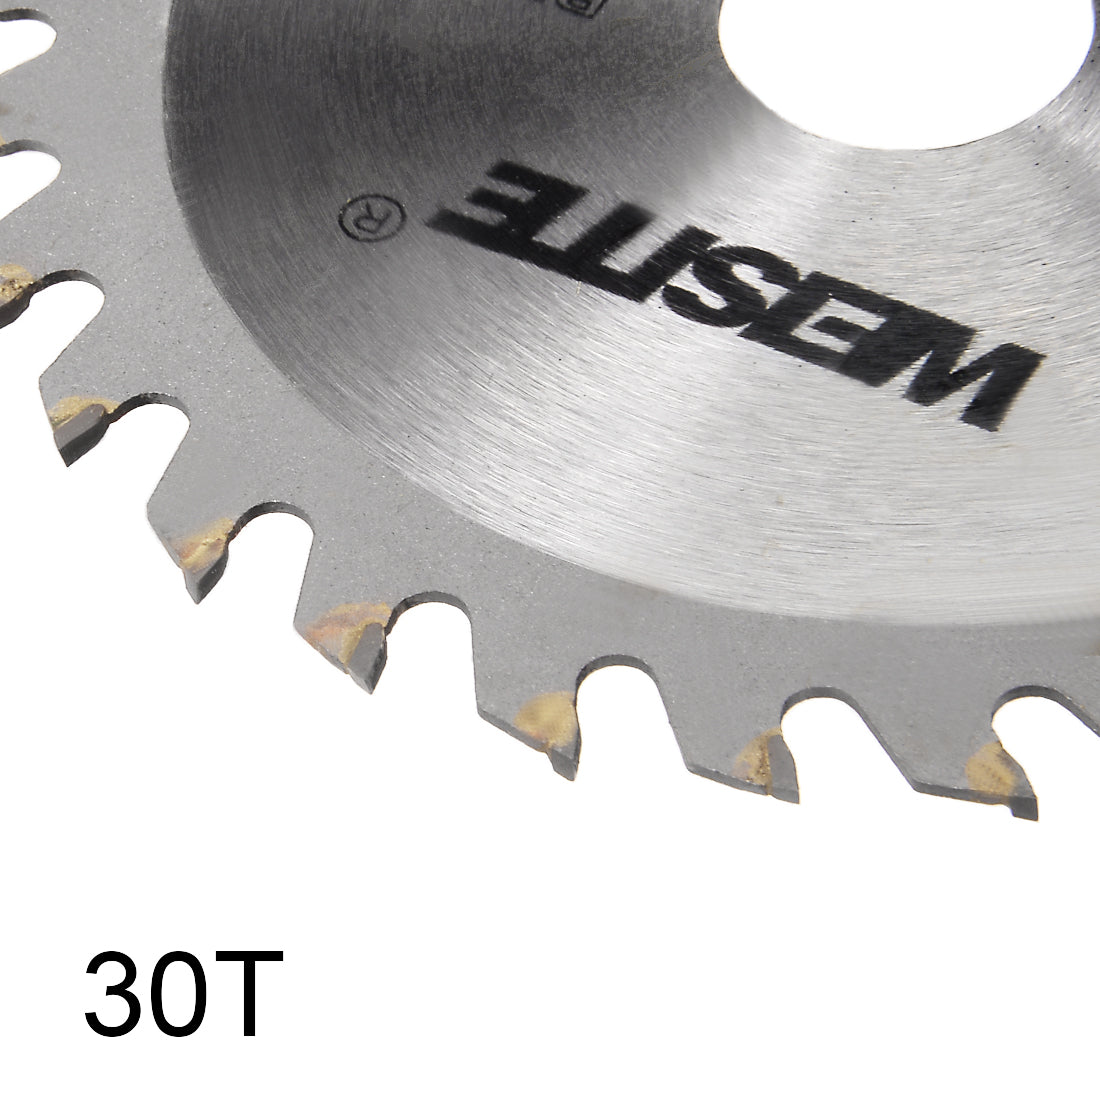 uxcell Uxcell Circular Saw Blade, Carbide Tipped Slitting Saw